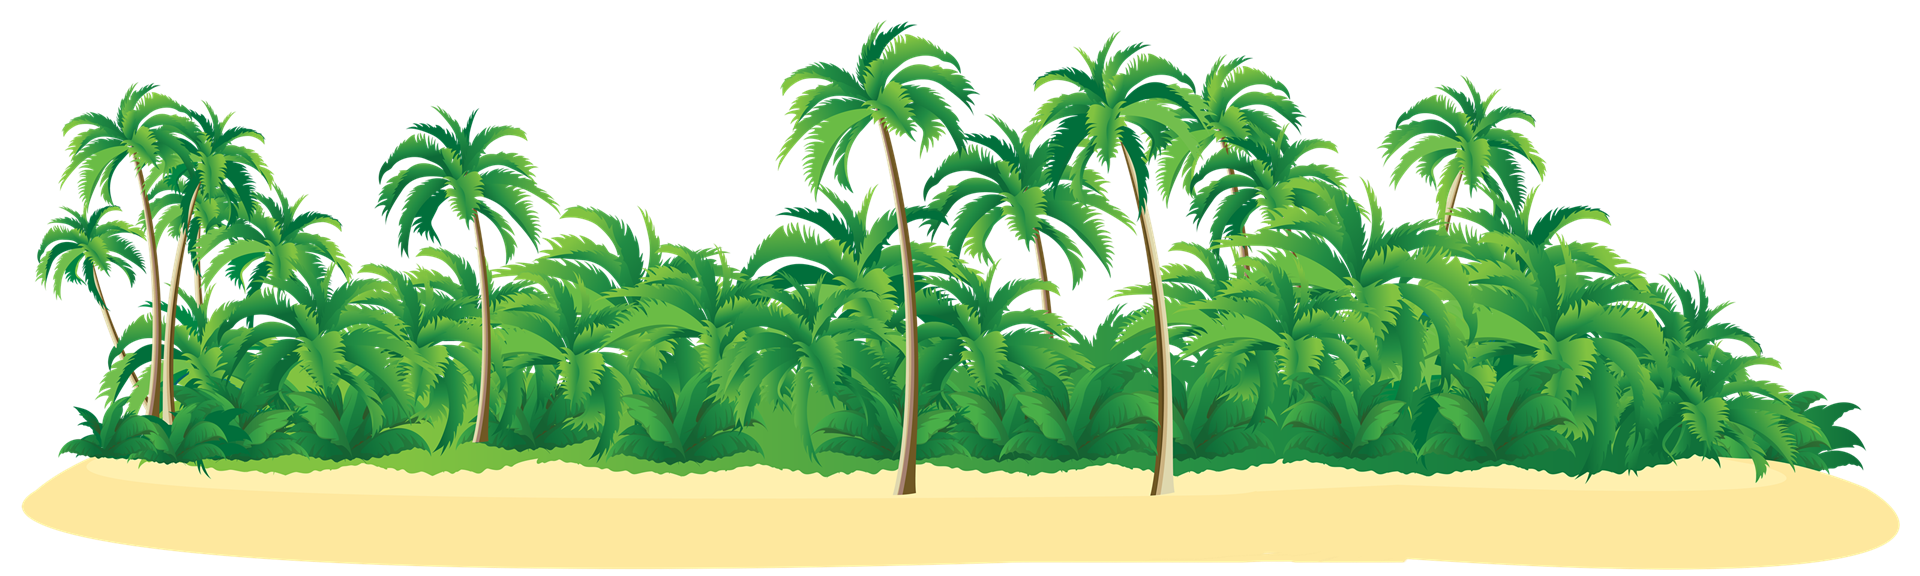 Island Png Images PNG Image